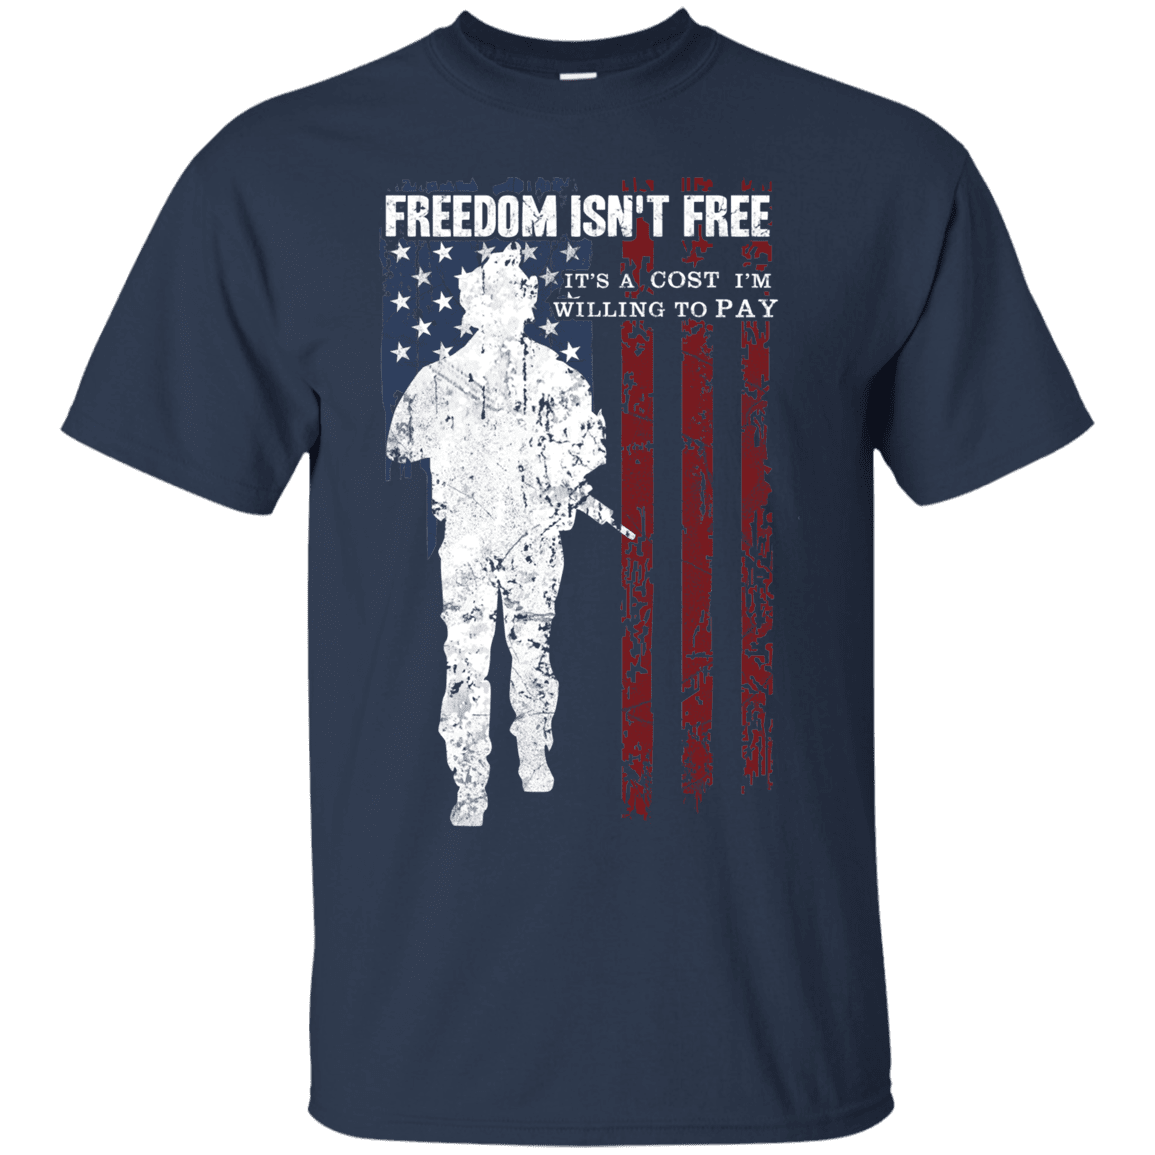 Military T-Shirt "Freedom Is Not Free - Willing to Pay Men" Front-TShirt-General-Veterans Nation